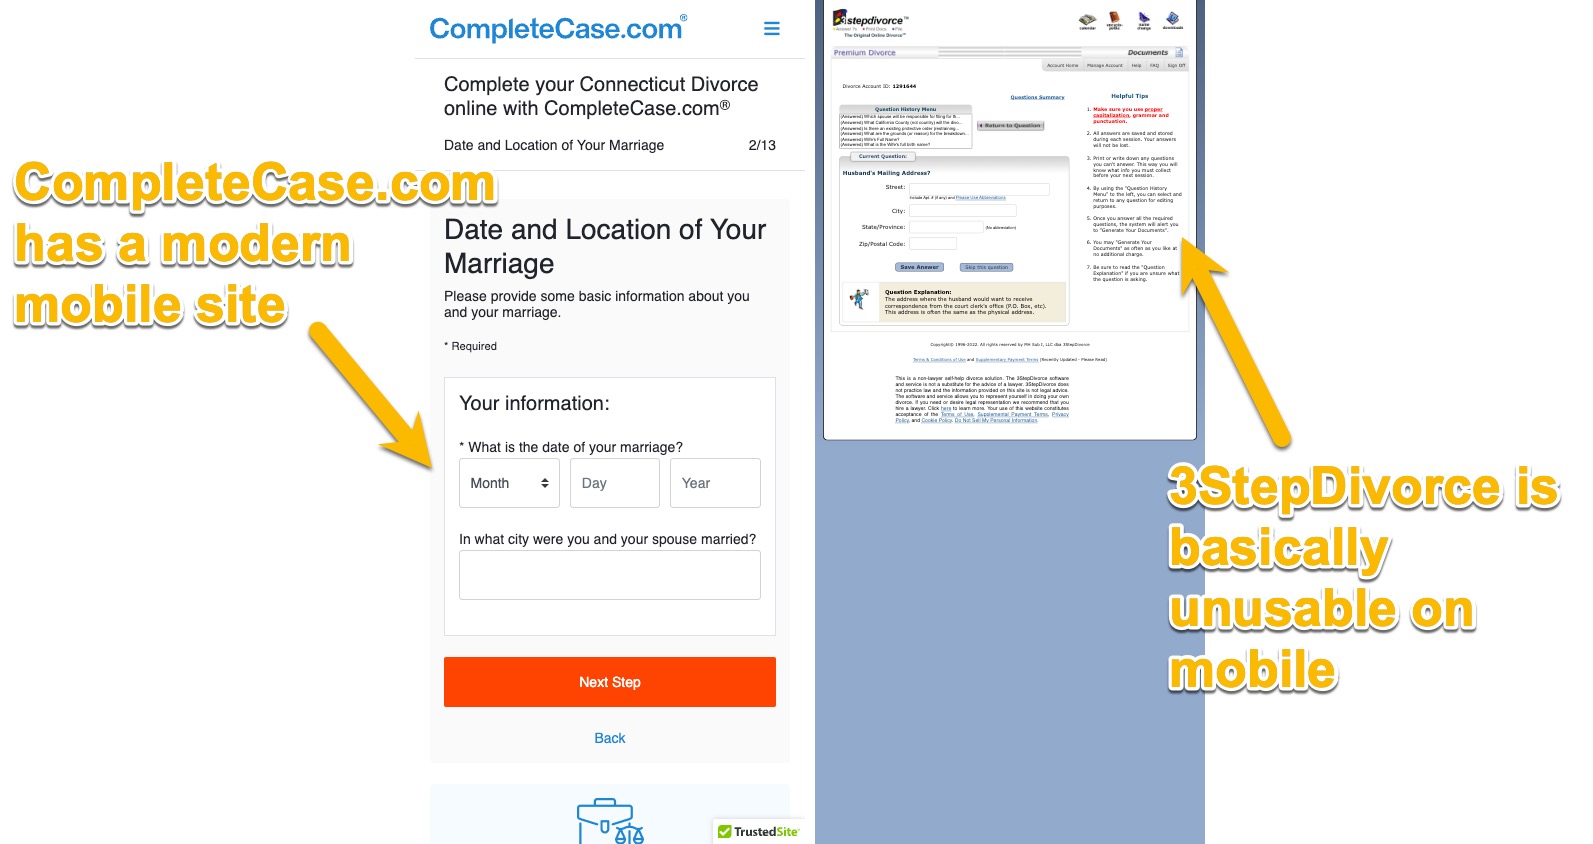 Comparison of screenshots from mobile phones for CompleteCase.com and 3StepDivorce.